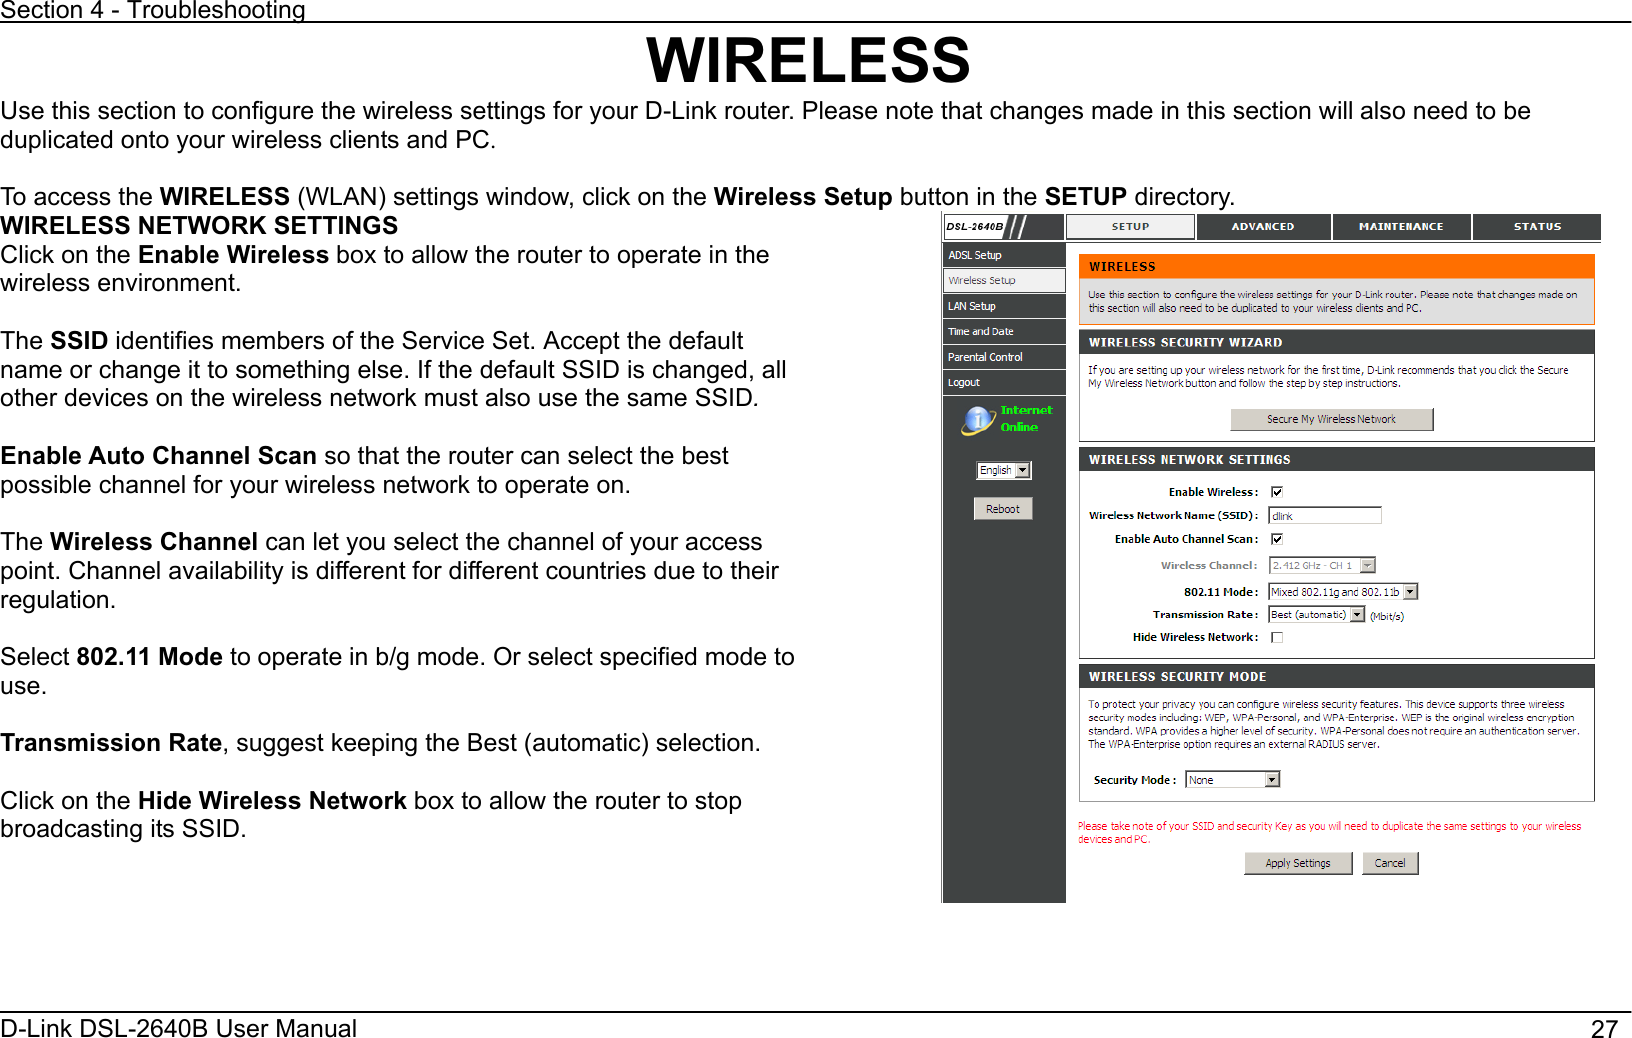 Section 4 - Troubleshooting D-Link DSL-2640B User Manual                                       27WIRELESSUse this section to configure the wireless settings for your D-Link router. Please note that changes made in this section will also need to be duplicated onto your wireless clients and PC.To access the WIRELESS (WLAN) settings window, click on the Wireless Setup button in the SETUP directory.   WIRELESS NETWORK SETTINGS Click on the Enable Wireless box to allow the router to operate in the wireless environment. The SSID identifies members of the Service Set. Accept the default name or change it to something else. If the default SSID is changed, all other devices on the wireless network must also use the same SSID.Enable Auto Channel Scan so that the router can select the best possible channel for your wireless network to operate on. The Wireless Channel can let you select the channel of your access point. Channel availability is different for different countries due to their regulation. Select 802.11 Mode to operate in b/g mode. Or select specified mode to use.Transmission Rate, suggest keeping the Best (automatic) selection. Click on the Hide Wireless Network box to allow the router to stop broadcasting its SSID.   